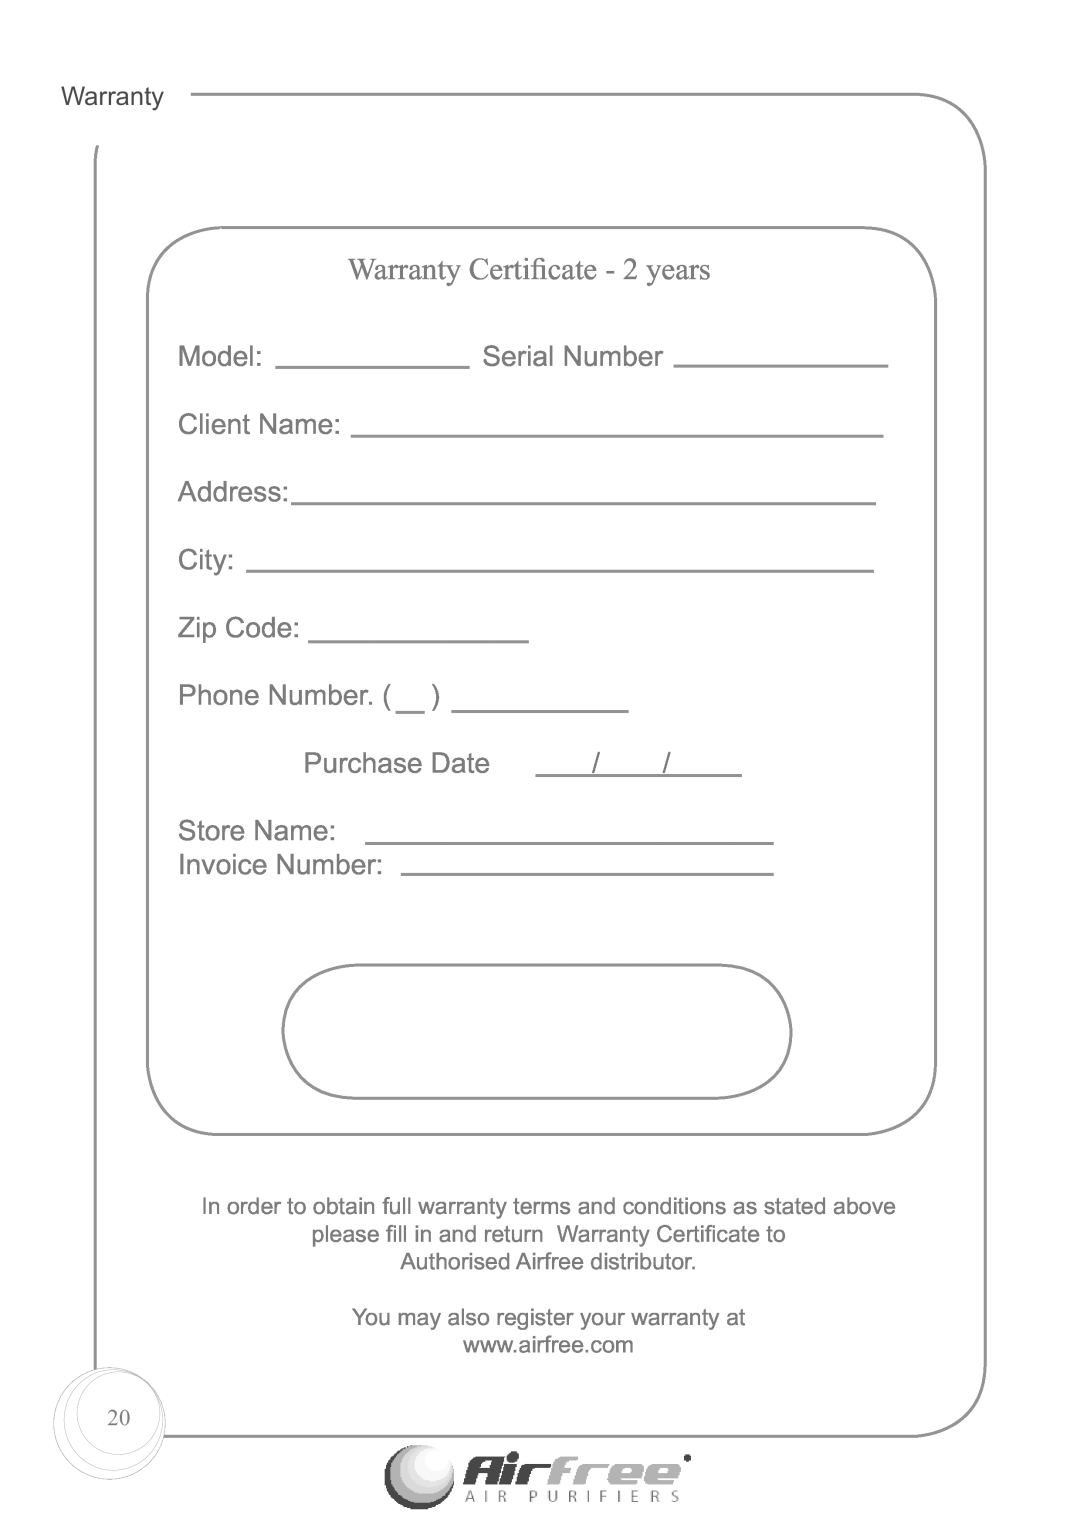 Airfree E60 Warranty Certiﬁcate - 2 years, Model, Serial Number, Client Name, Address, City, Zip Code, Phone Number 